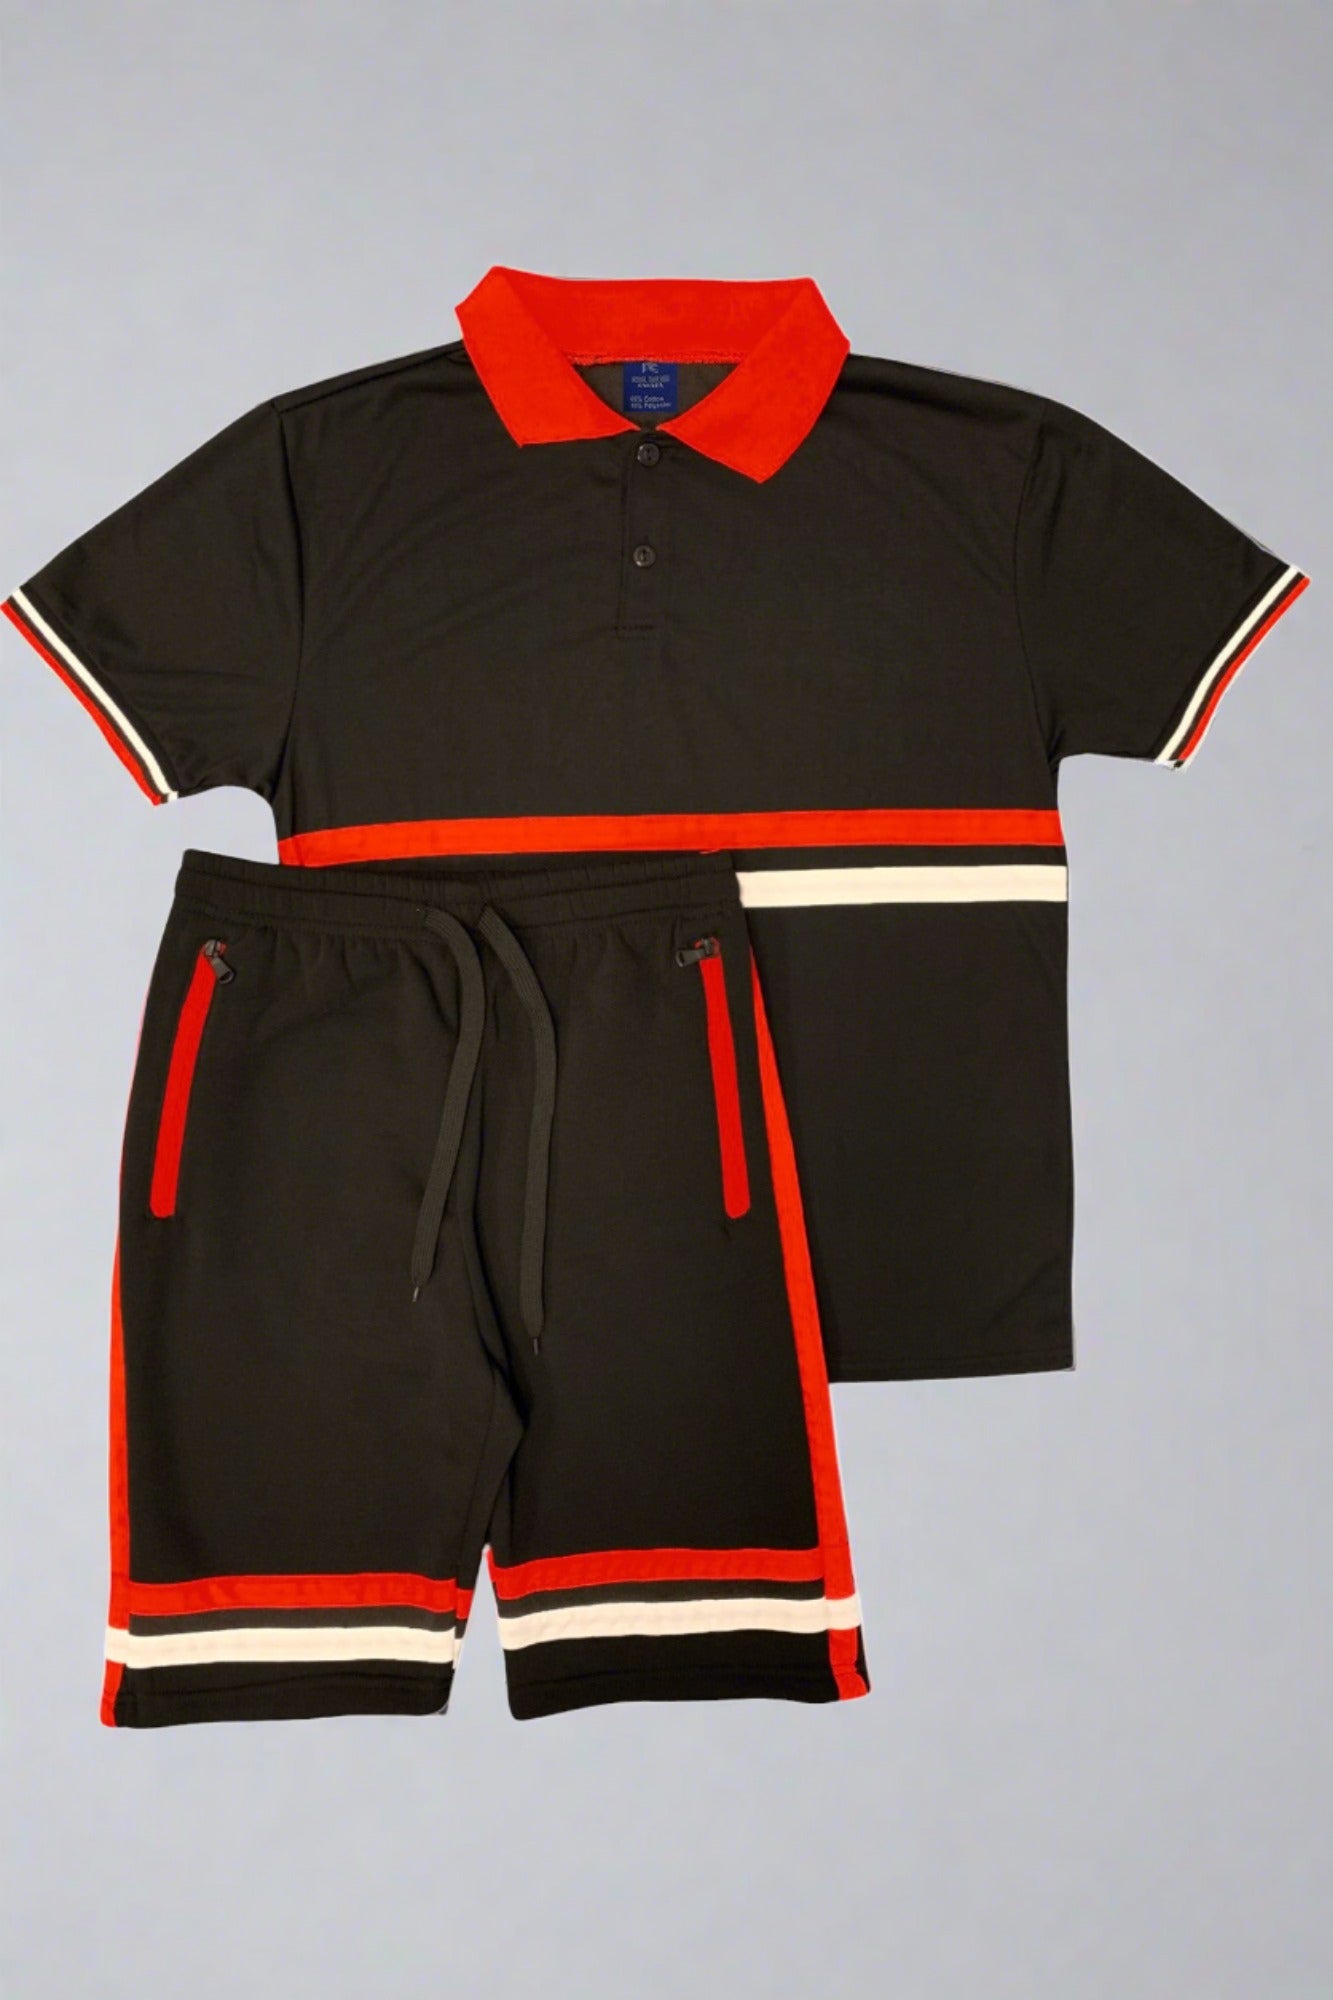 Royal Threads Canada Men’s 2-Piece Short Set with 2 bottom down Shirt and Soft Fleece Summer Shorts Matching Outfit